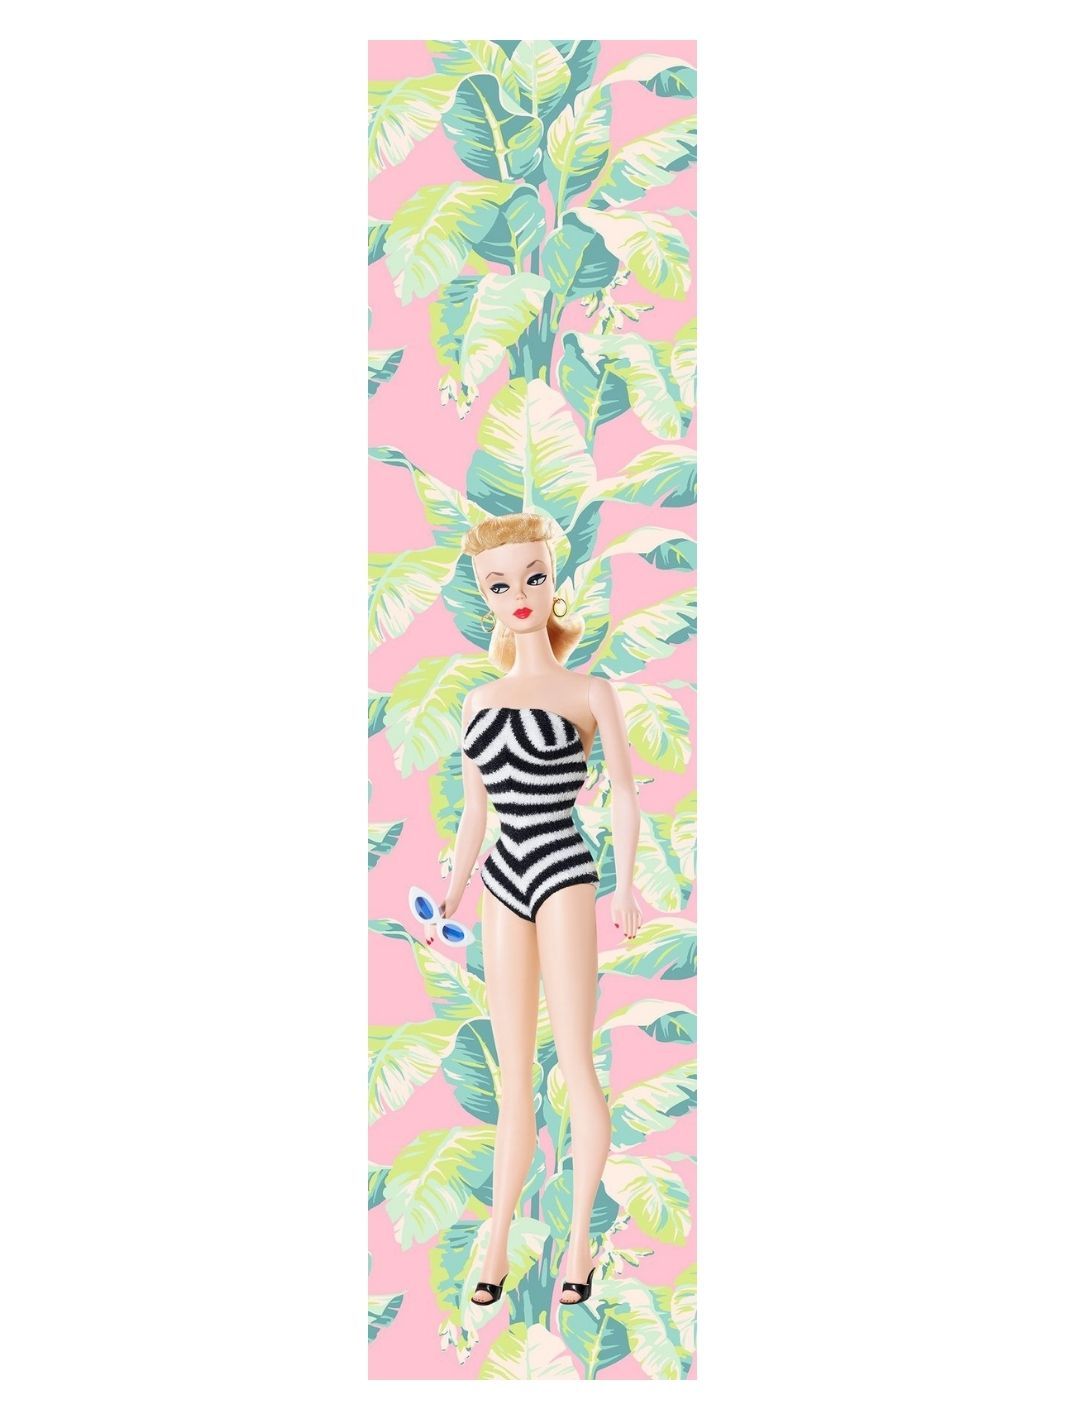 'Life Size Vintage Barbie™' Removable Wall Mural by Barbie™ - Pink & Lime